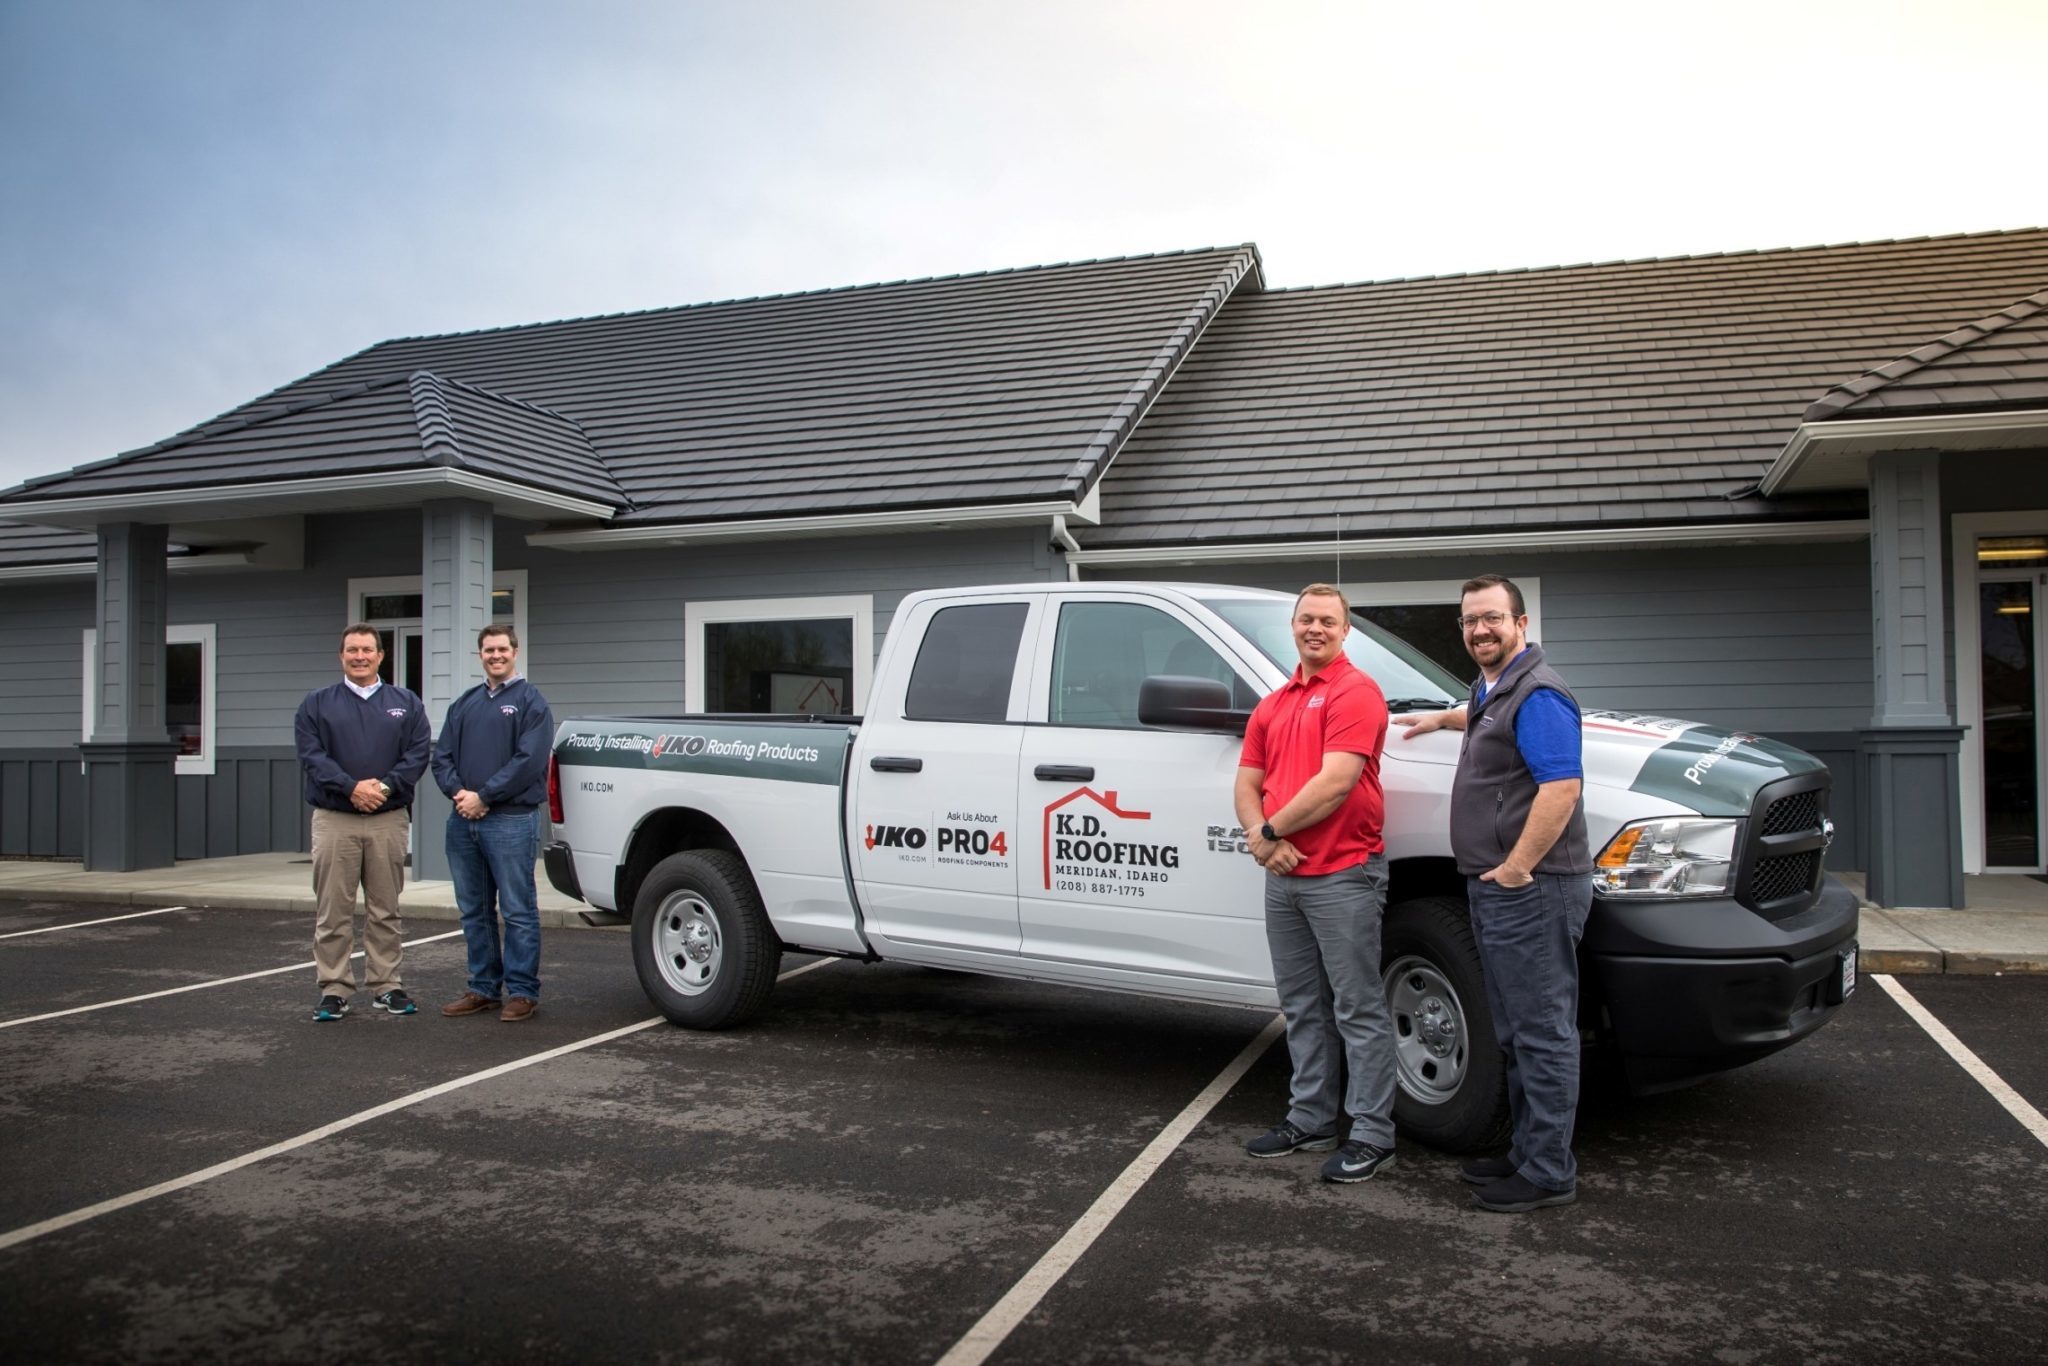 Idaho Roofing Contractor Earns Cash And Truck